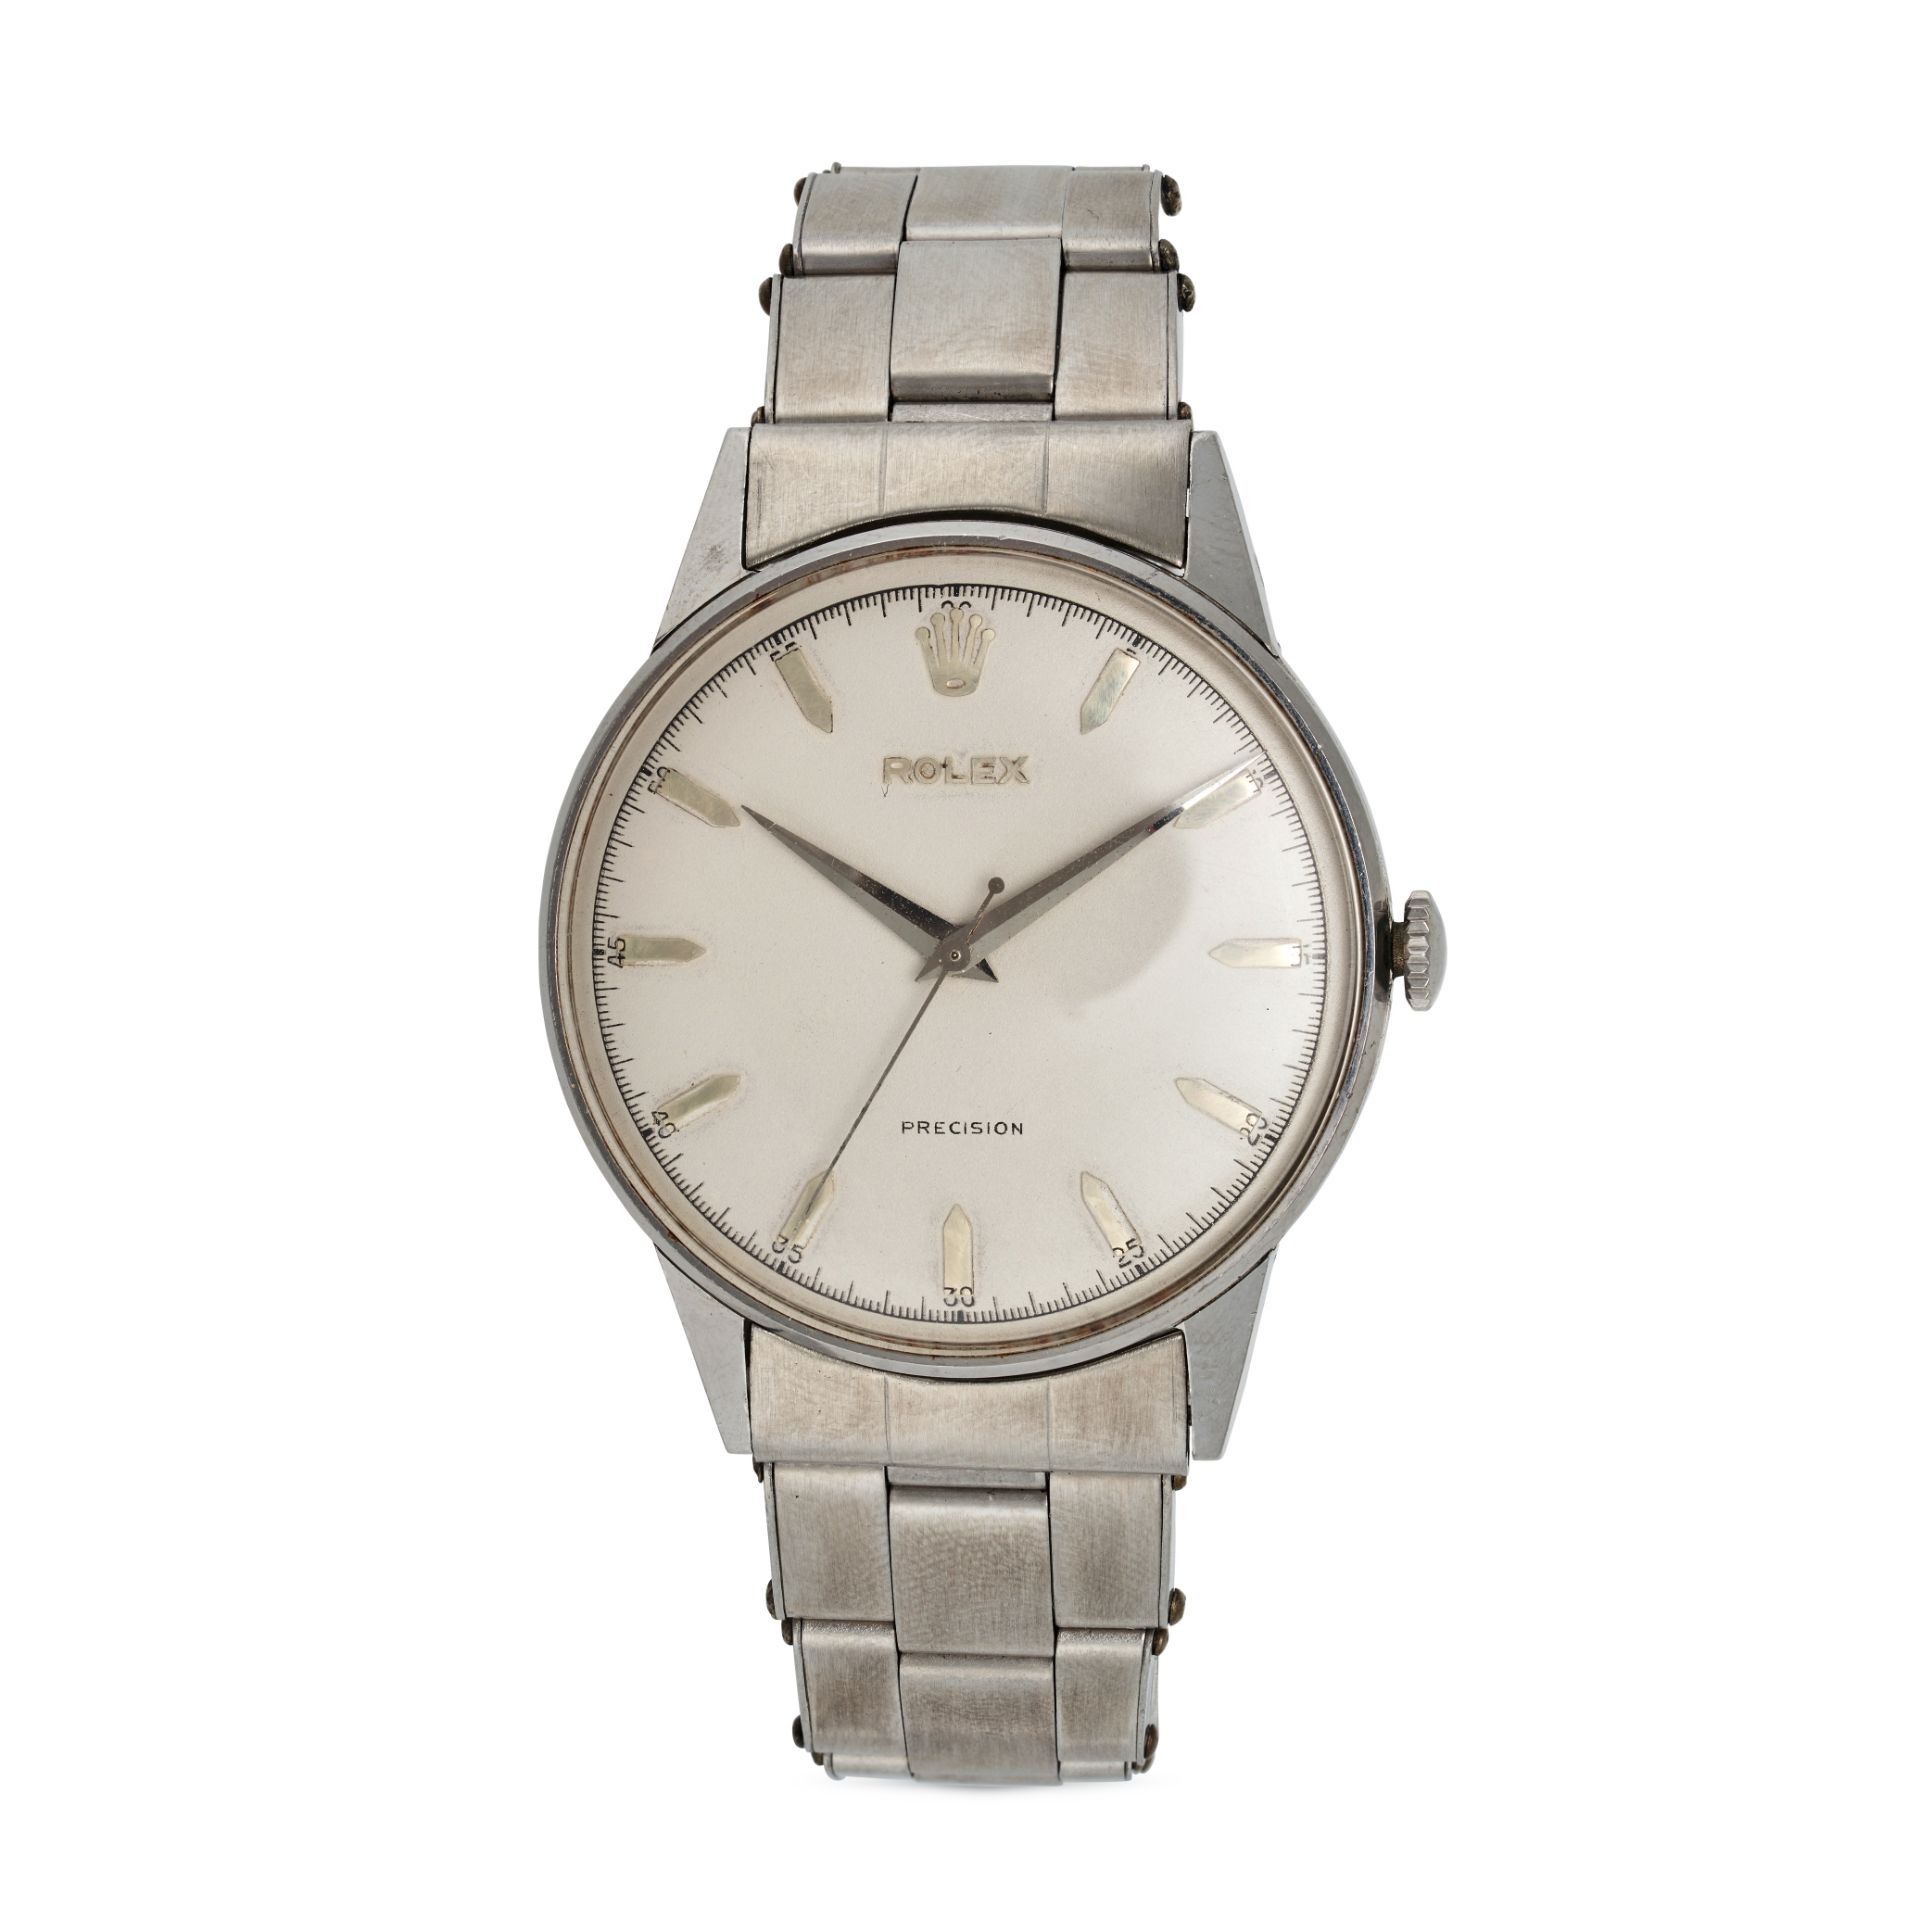 ROLEX - A VINTAGE ROLEX PRECISION WRISTWATCH in stainless steel, 9022, cal. 1210, seventeen jewel...